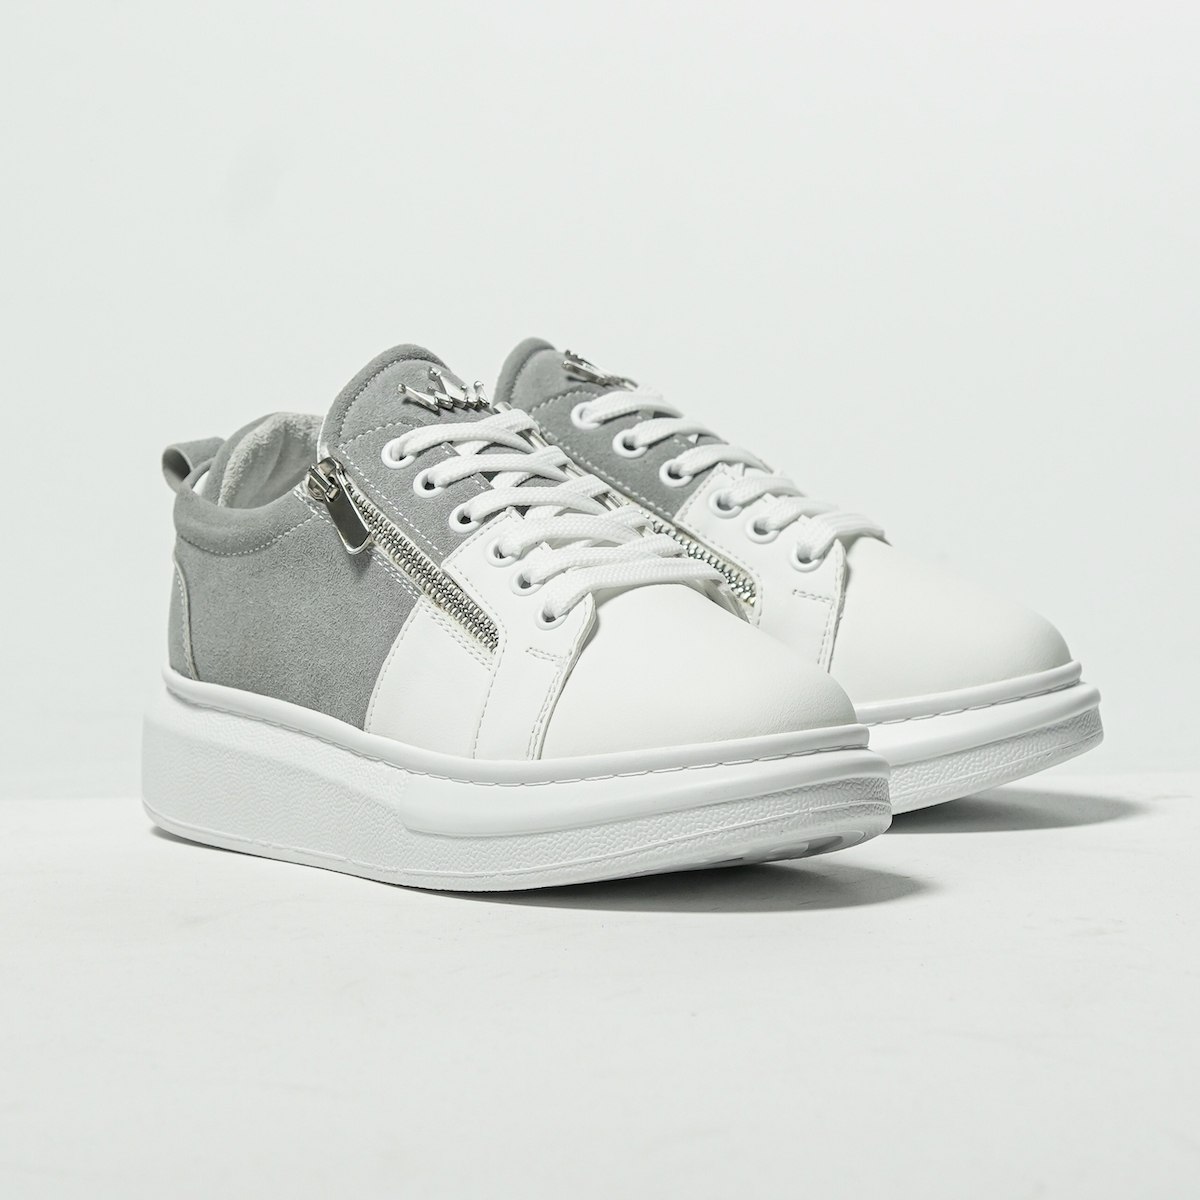 Chunky Sneakers Designer Shoes with Zippers in Grey and White | Martin Valen